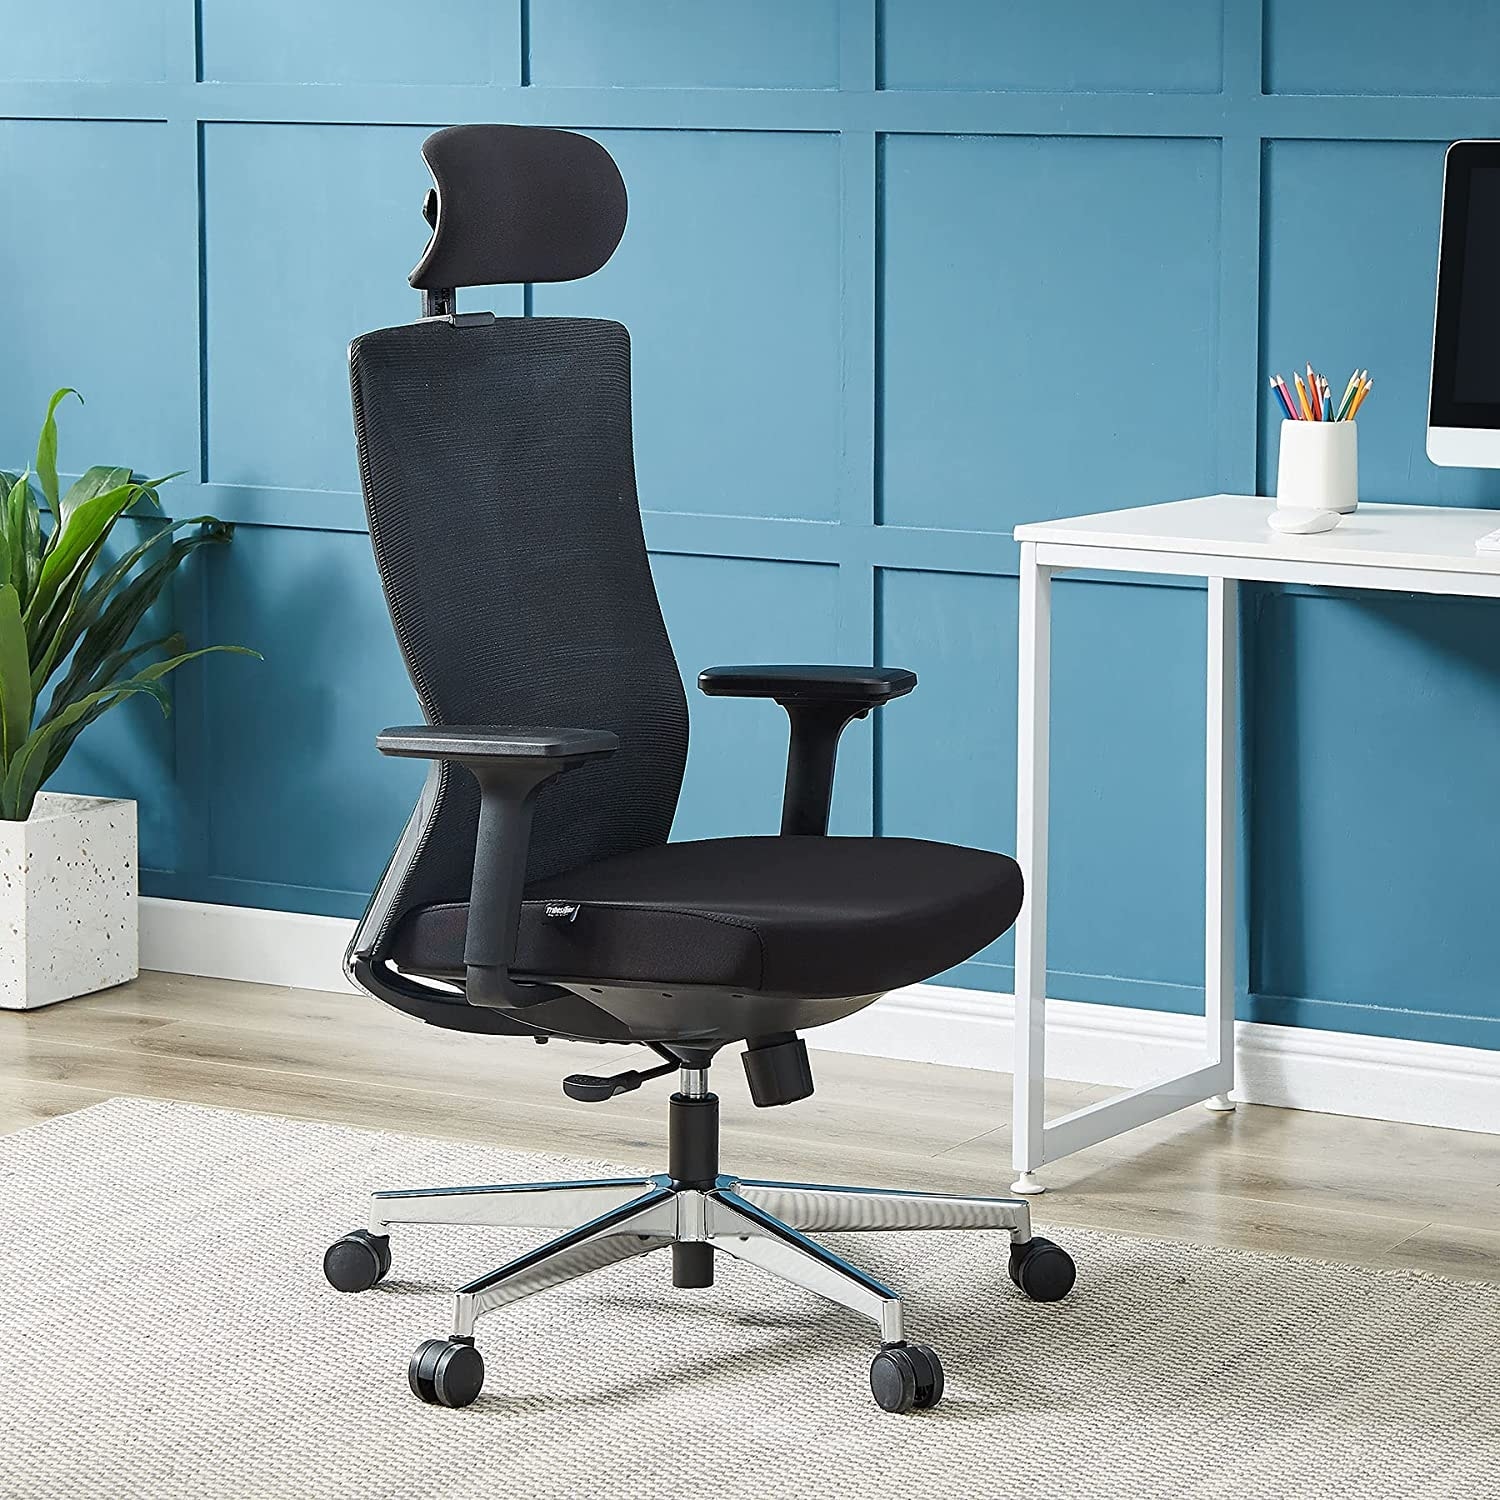 Bluebell Ergonomic Office Chairs with Lumbar, Soft Seat Cushion and 3D Armrests - 18.9 x 19.8 x 51.9 inches